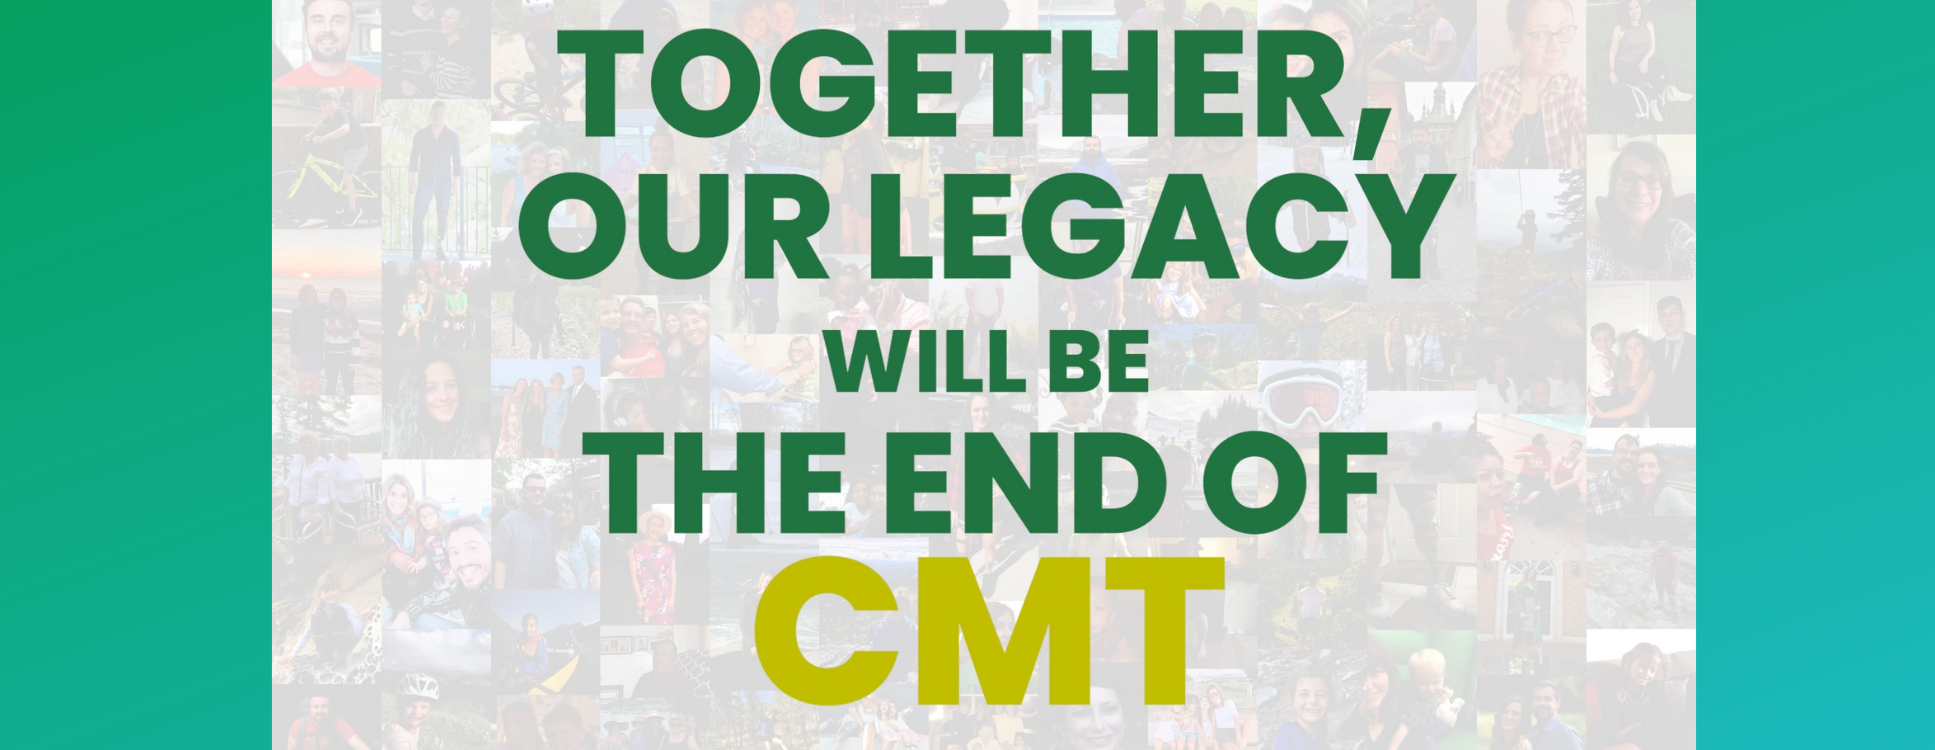 CMT Research Foundation Personal Fundraising